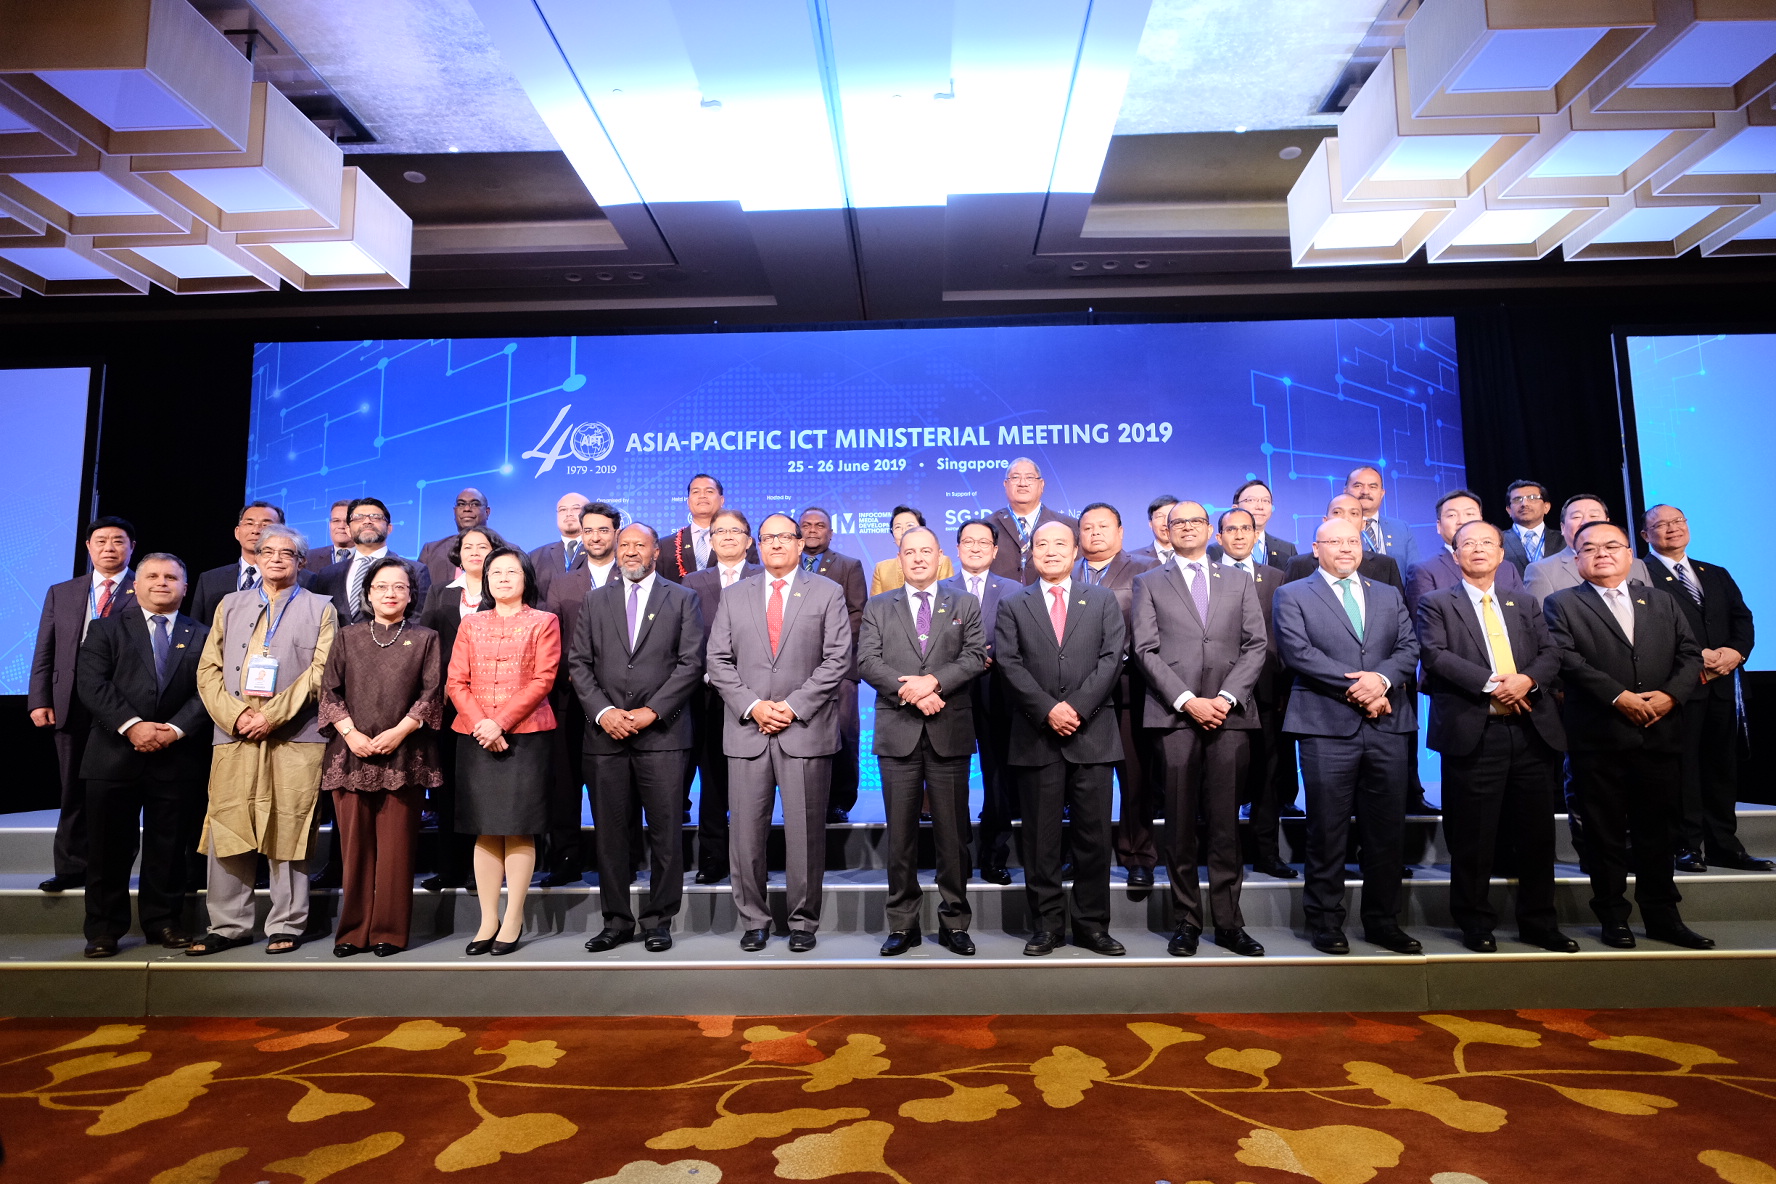 Mr. Victor Lam, Government Chief Information Officer (third row, third from right), in group photo with other guests at the “Asia-Pacific ICT Ministerial Meeting 2019”.